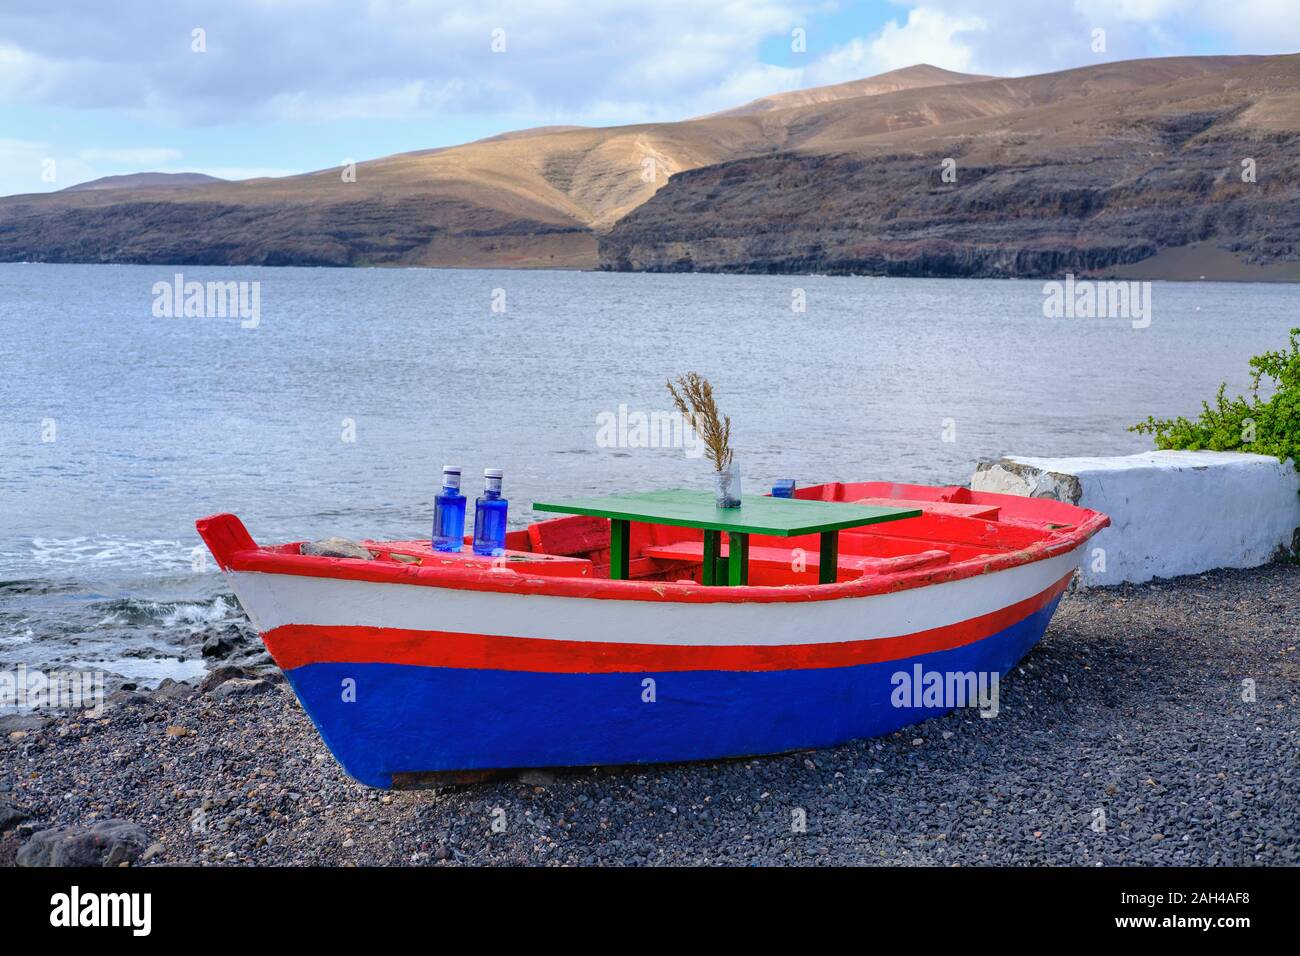 Spain, Canary Islands, Lanzarote,Yaiza, Playa Quemada, Colorful boat with table and bottles Stock Photo